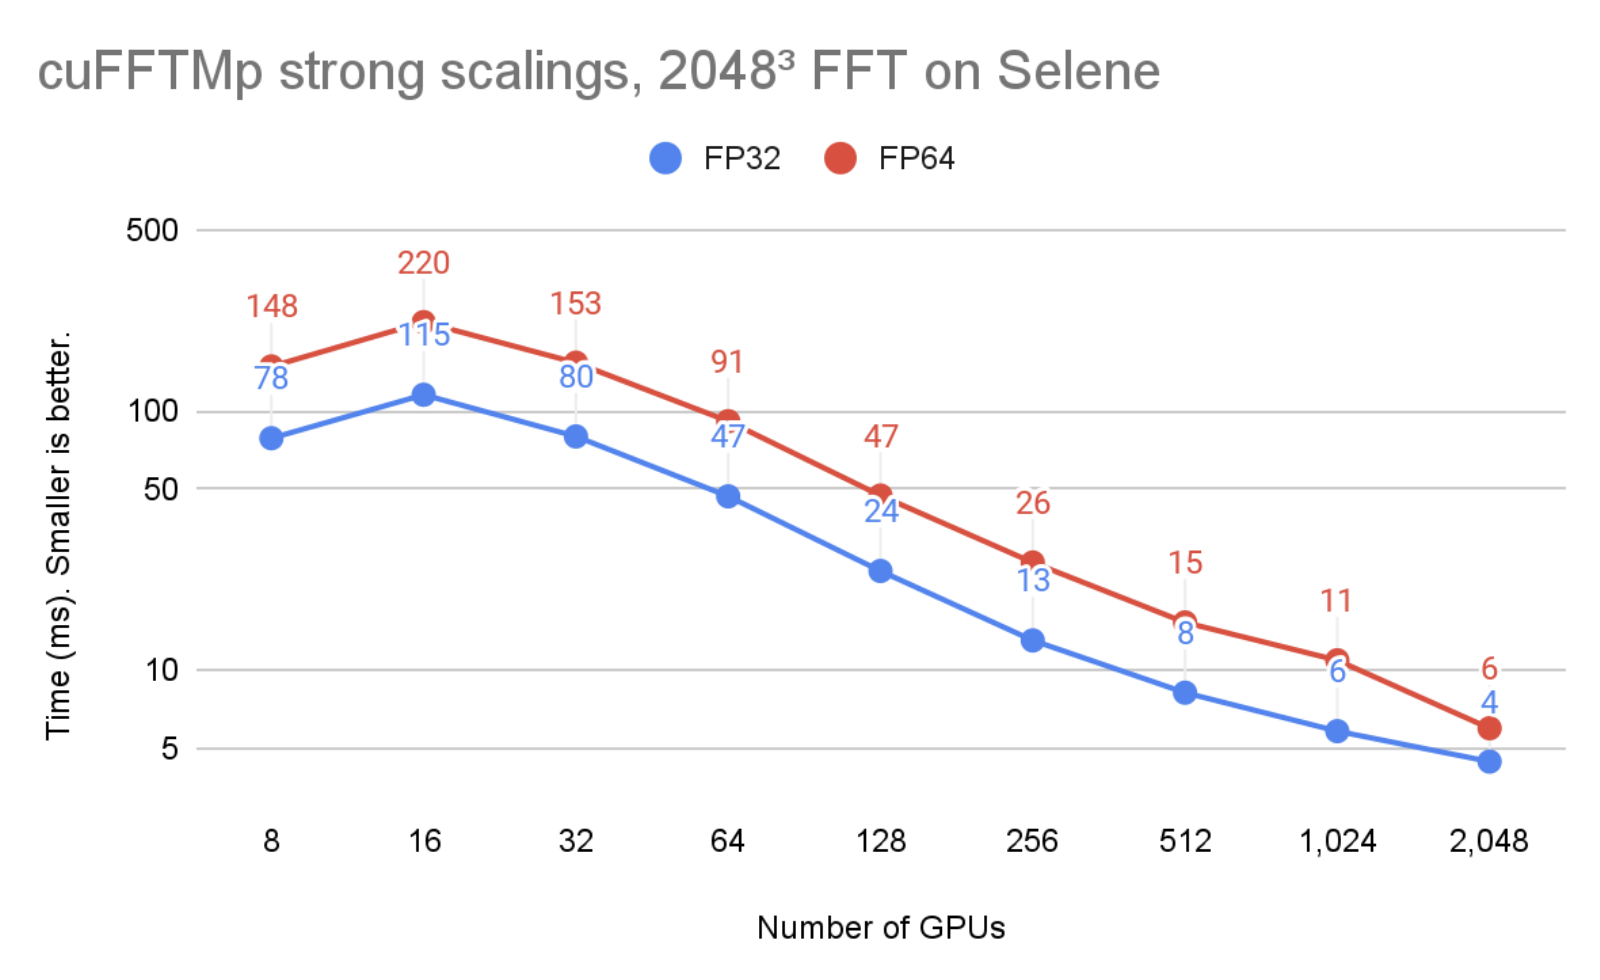 Chart provides strong scaling results across multiple GPUs for an FFT size of 20483.